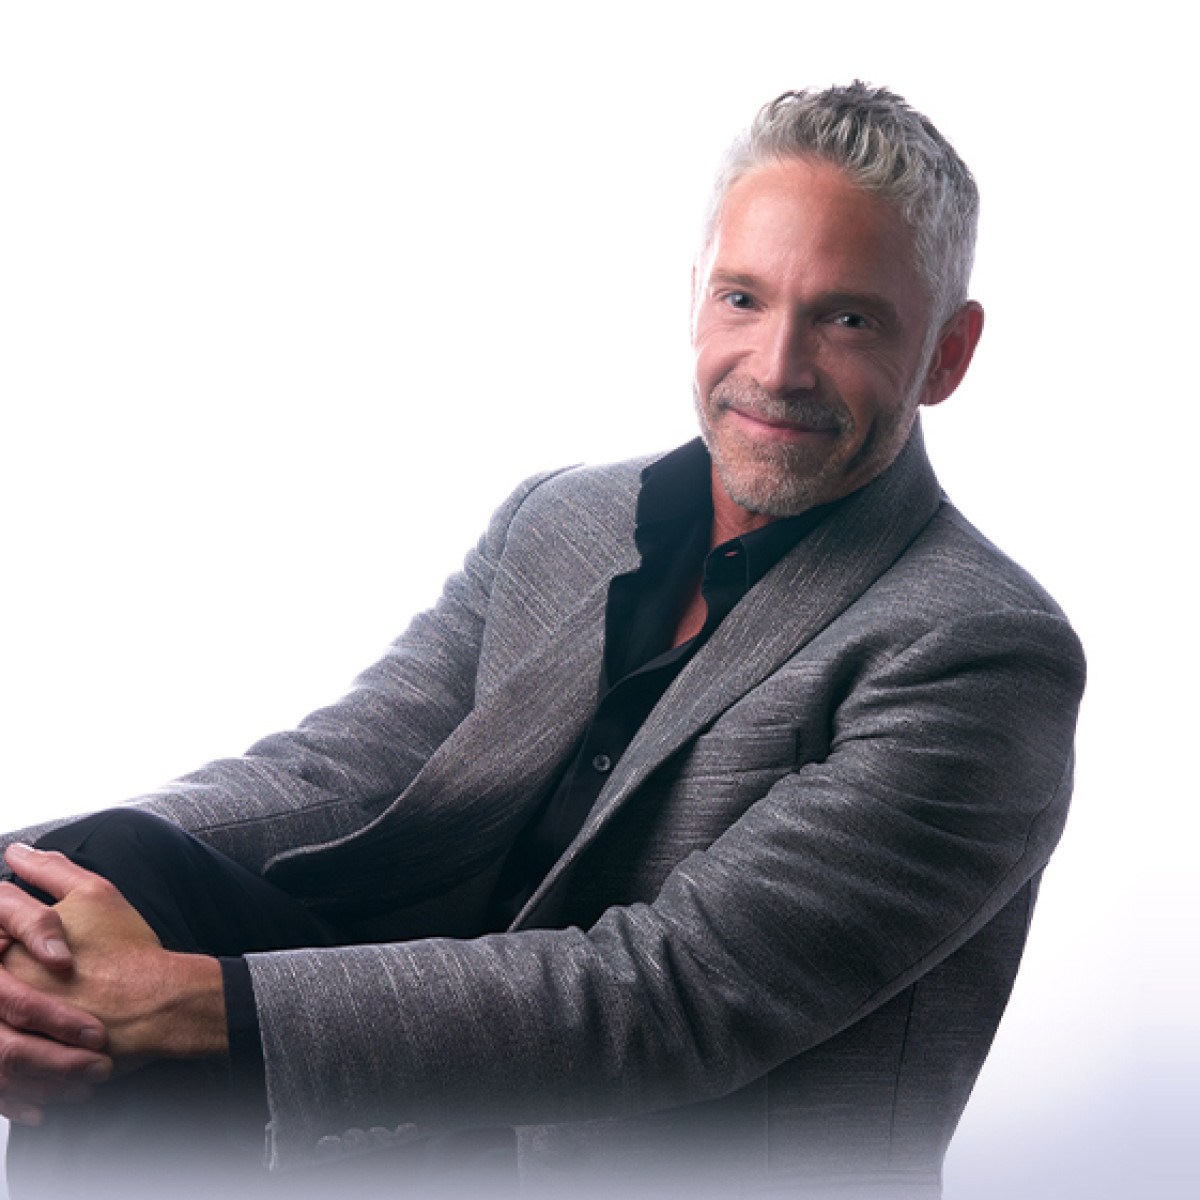 Dave Koz and Friends 25th Anniversary Christmas Tour